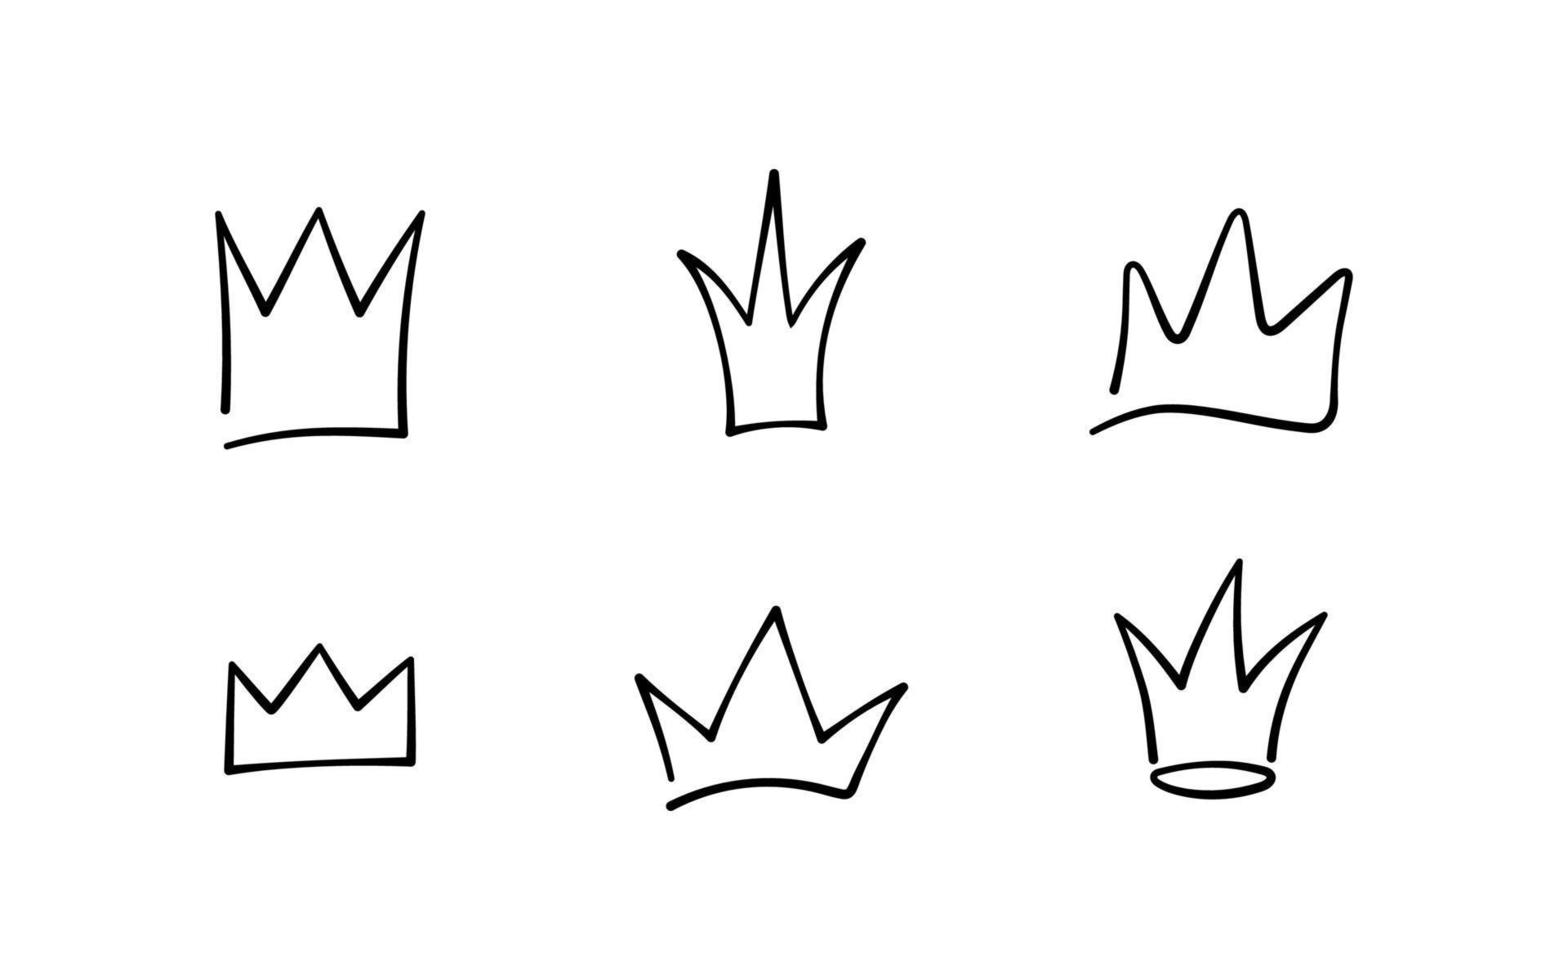 Hand drawn doodle crowns set. King crown sketches, majestic tiara, king and queen royal diadems. Vector illustration isolated in doodle style on white background